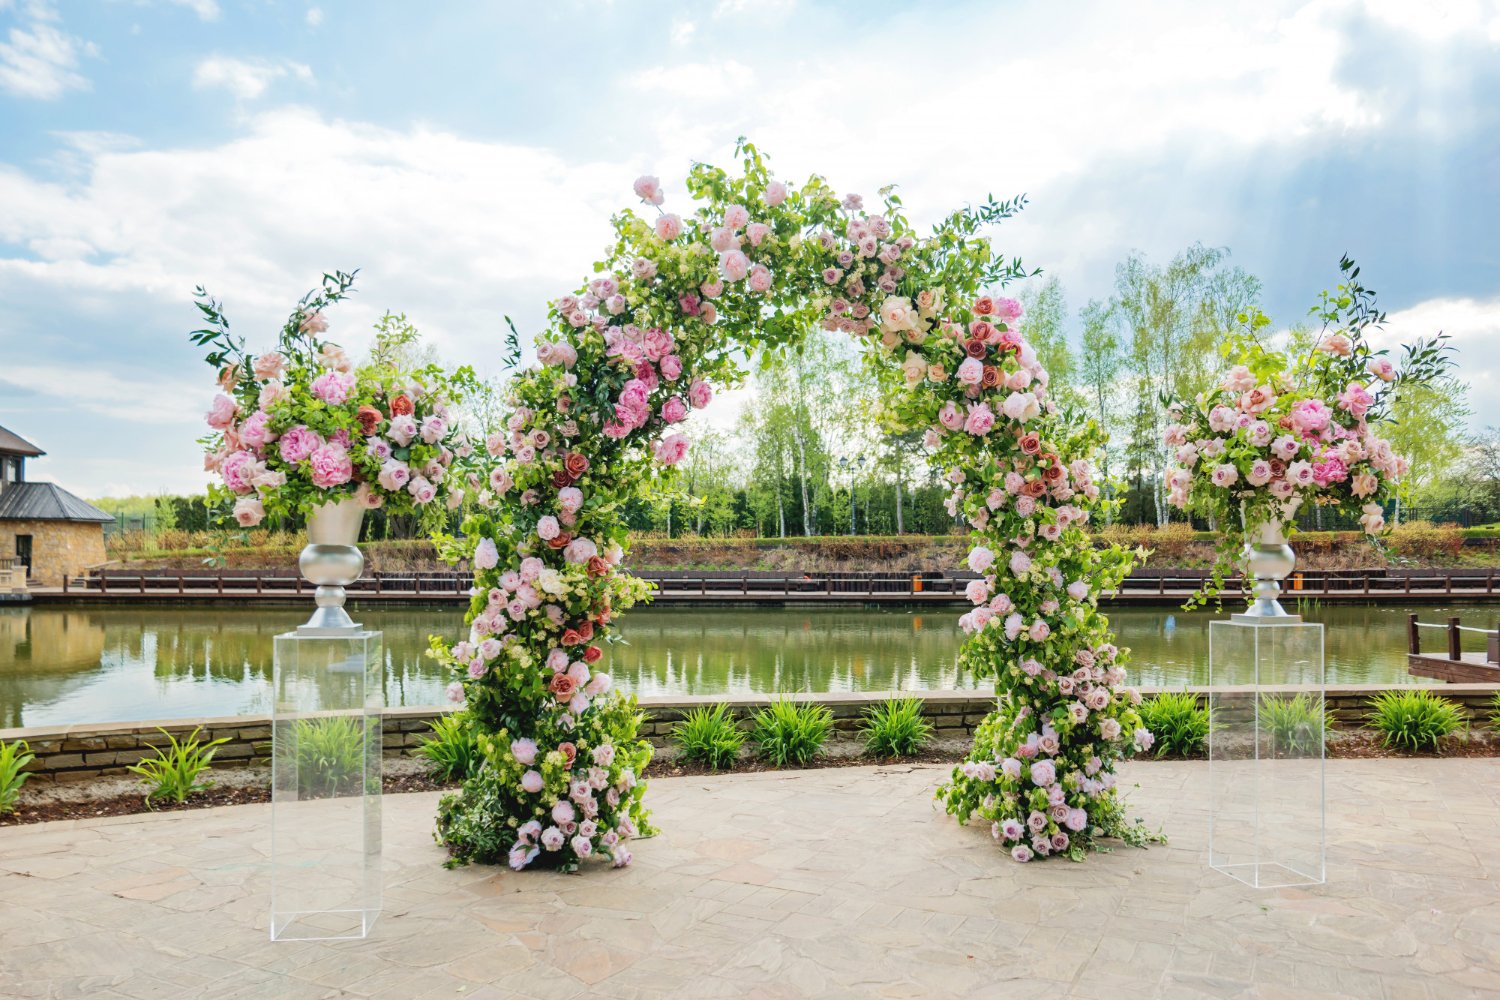  beautiful floral arch for wedding ceremony